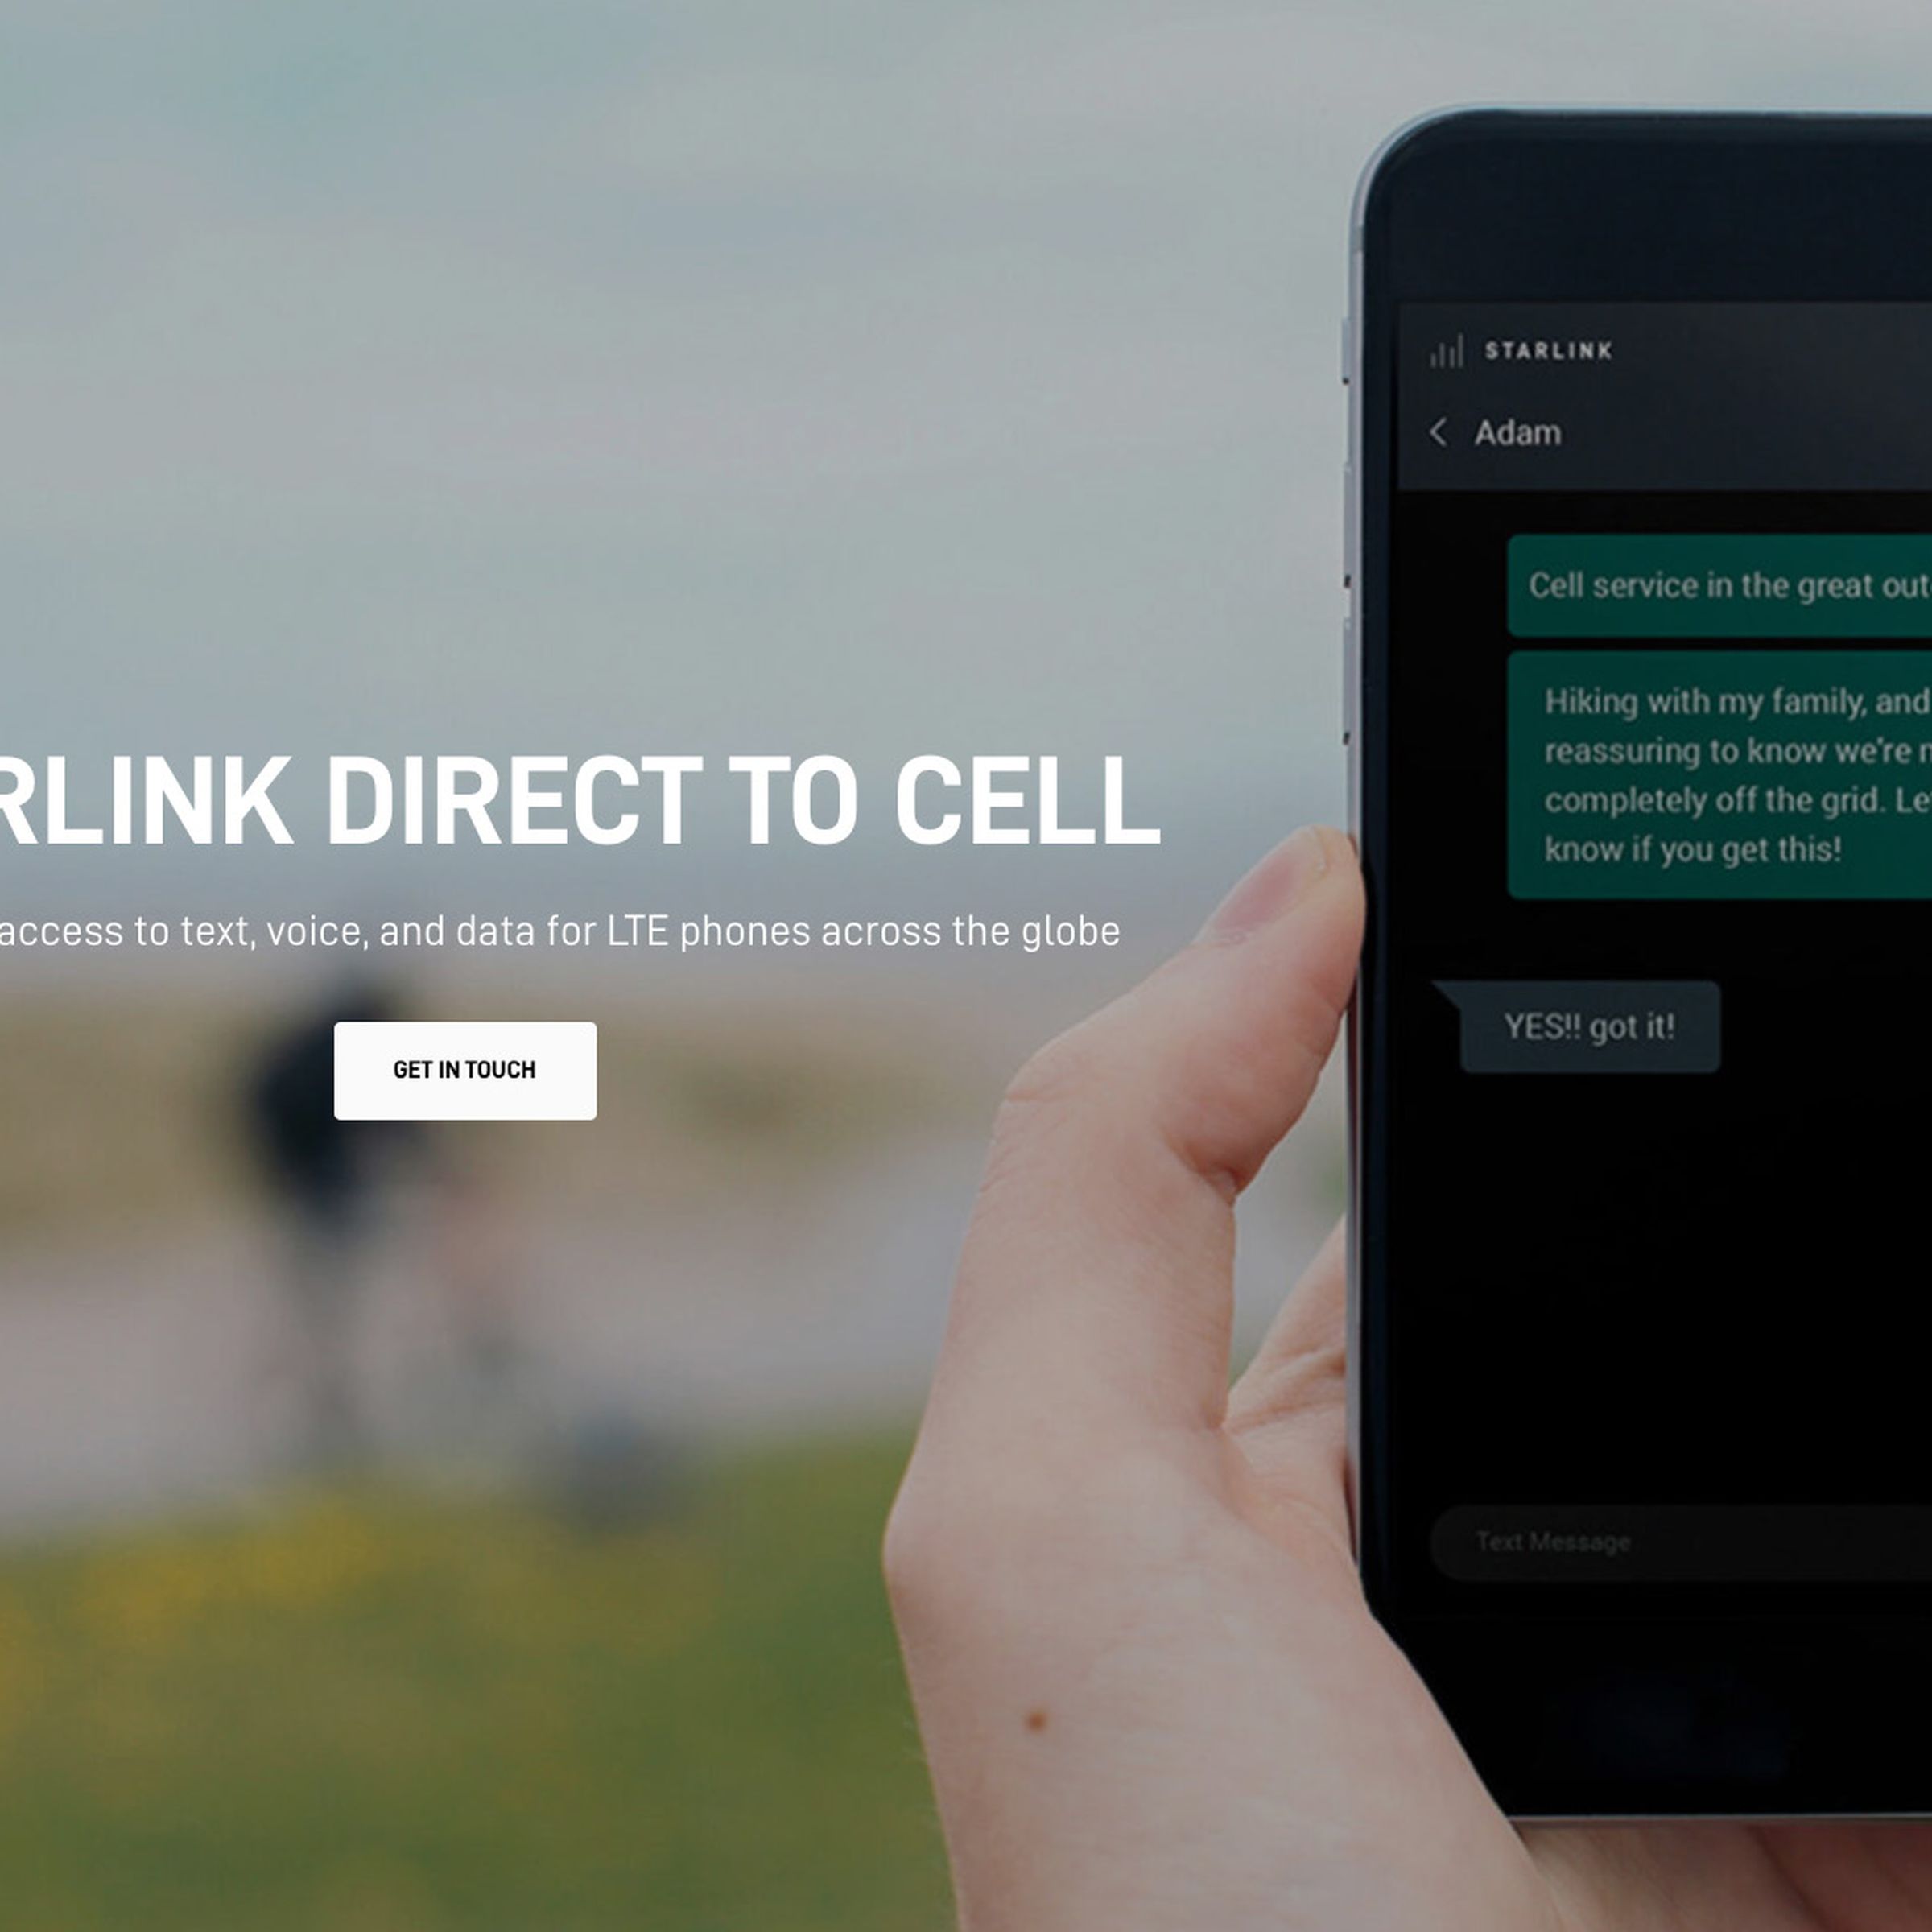 Starlink Direct to Cell homepage, with person holding phone showing text conversation.